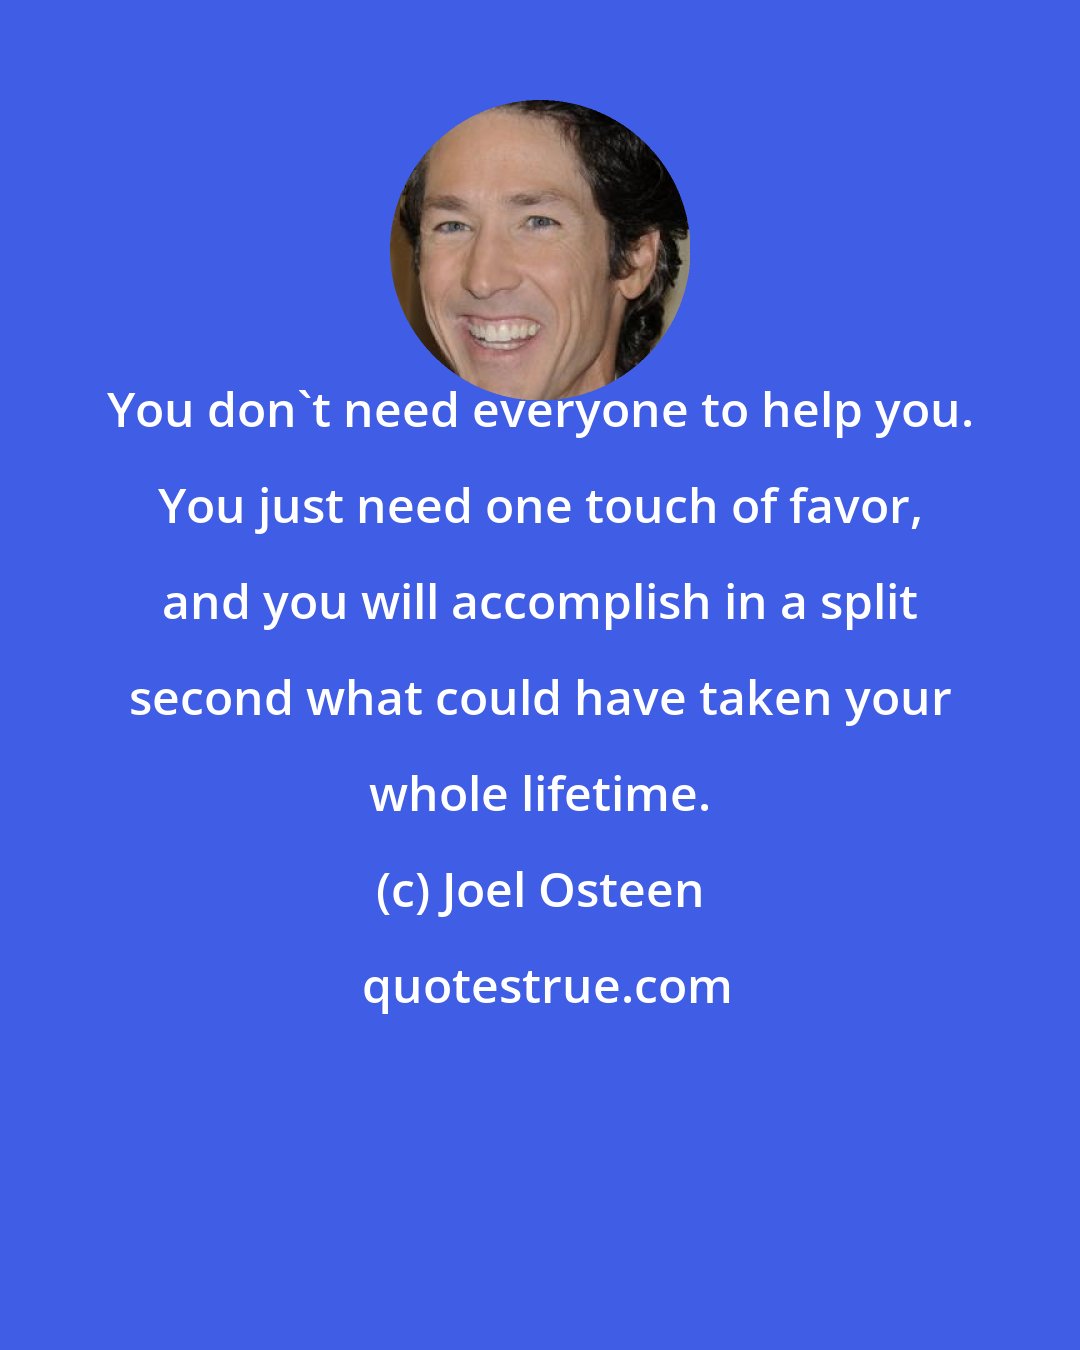 Joel Osteen: You don't need everyone to help you. You just need one touch of favor, and you will accomplish in a split second what could have taken your whole lifetime.